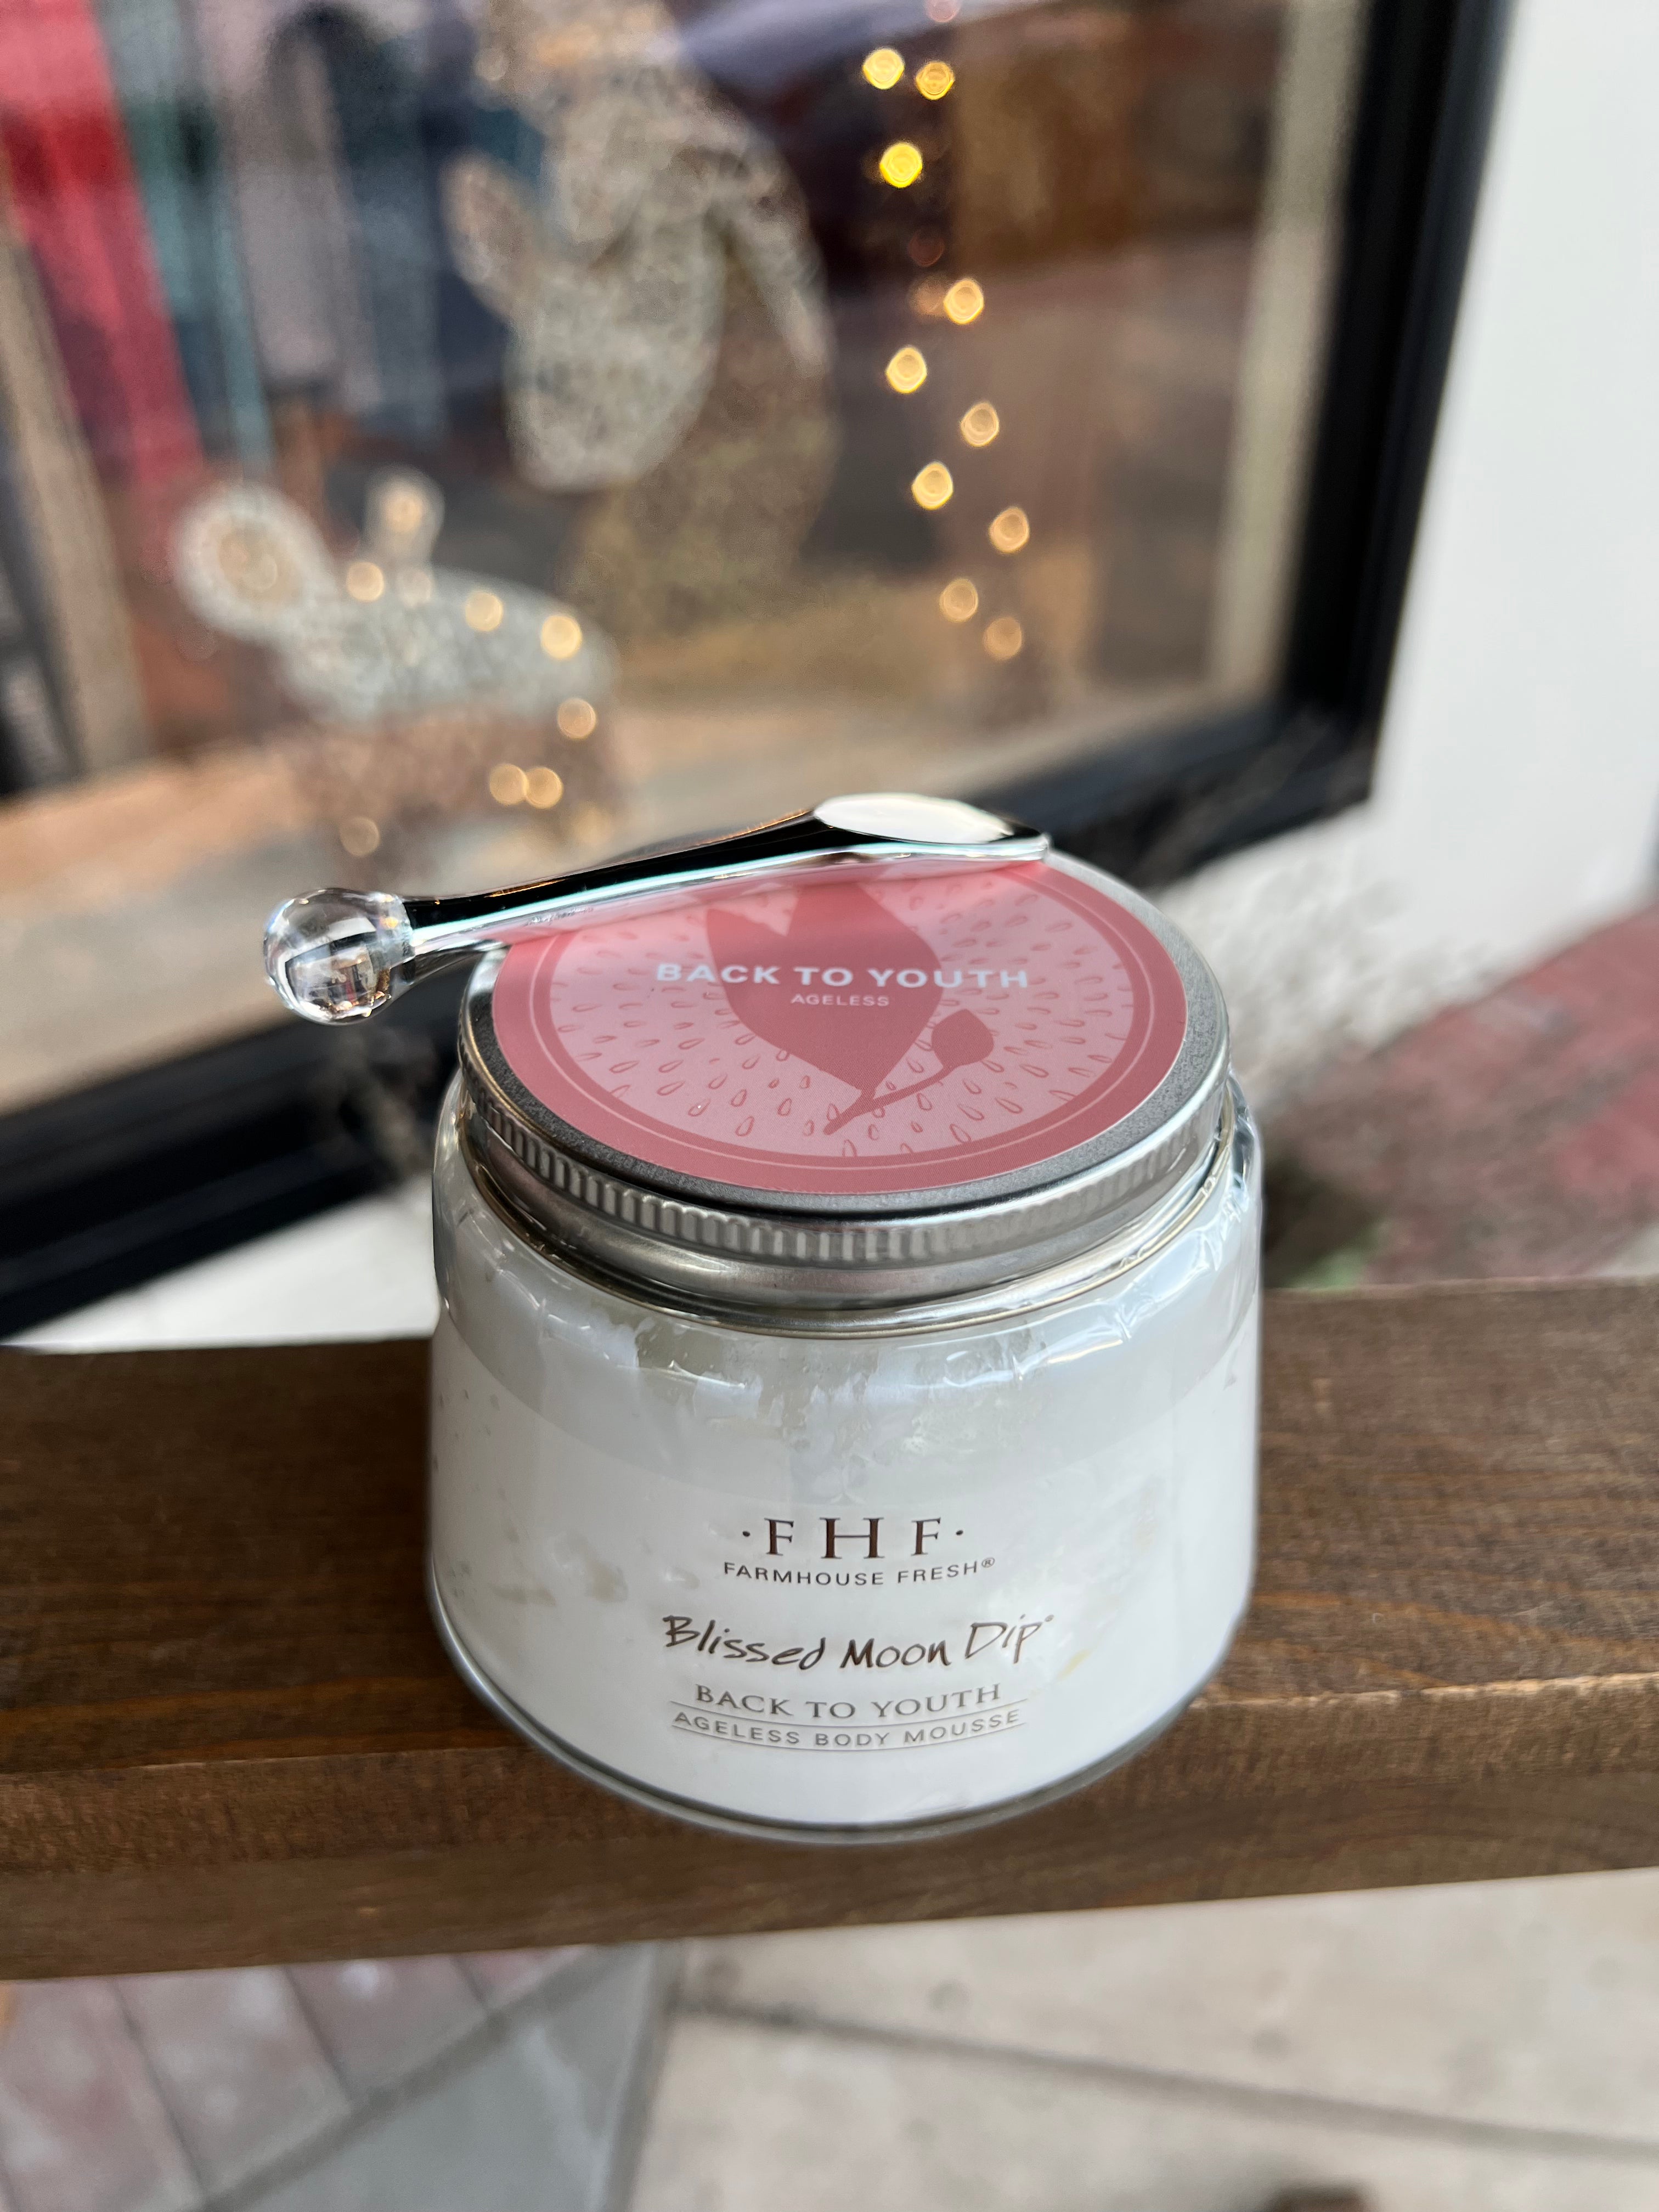 Farmhouse Fresh - Blissed Moon Dip Back to Youth Body Mousse